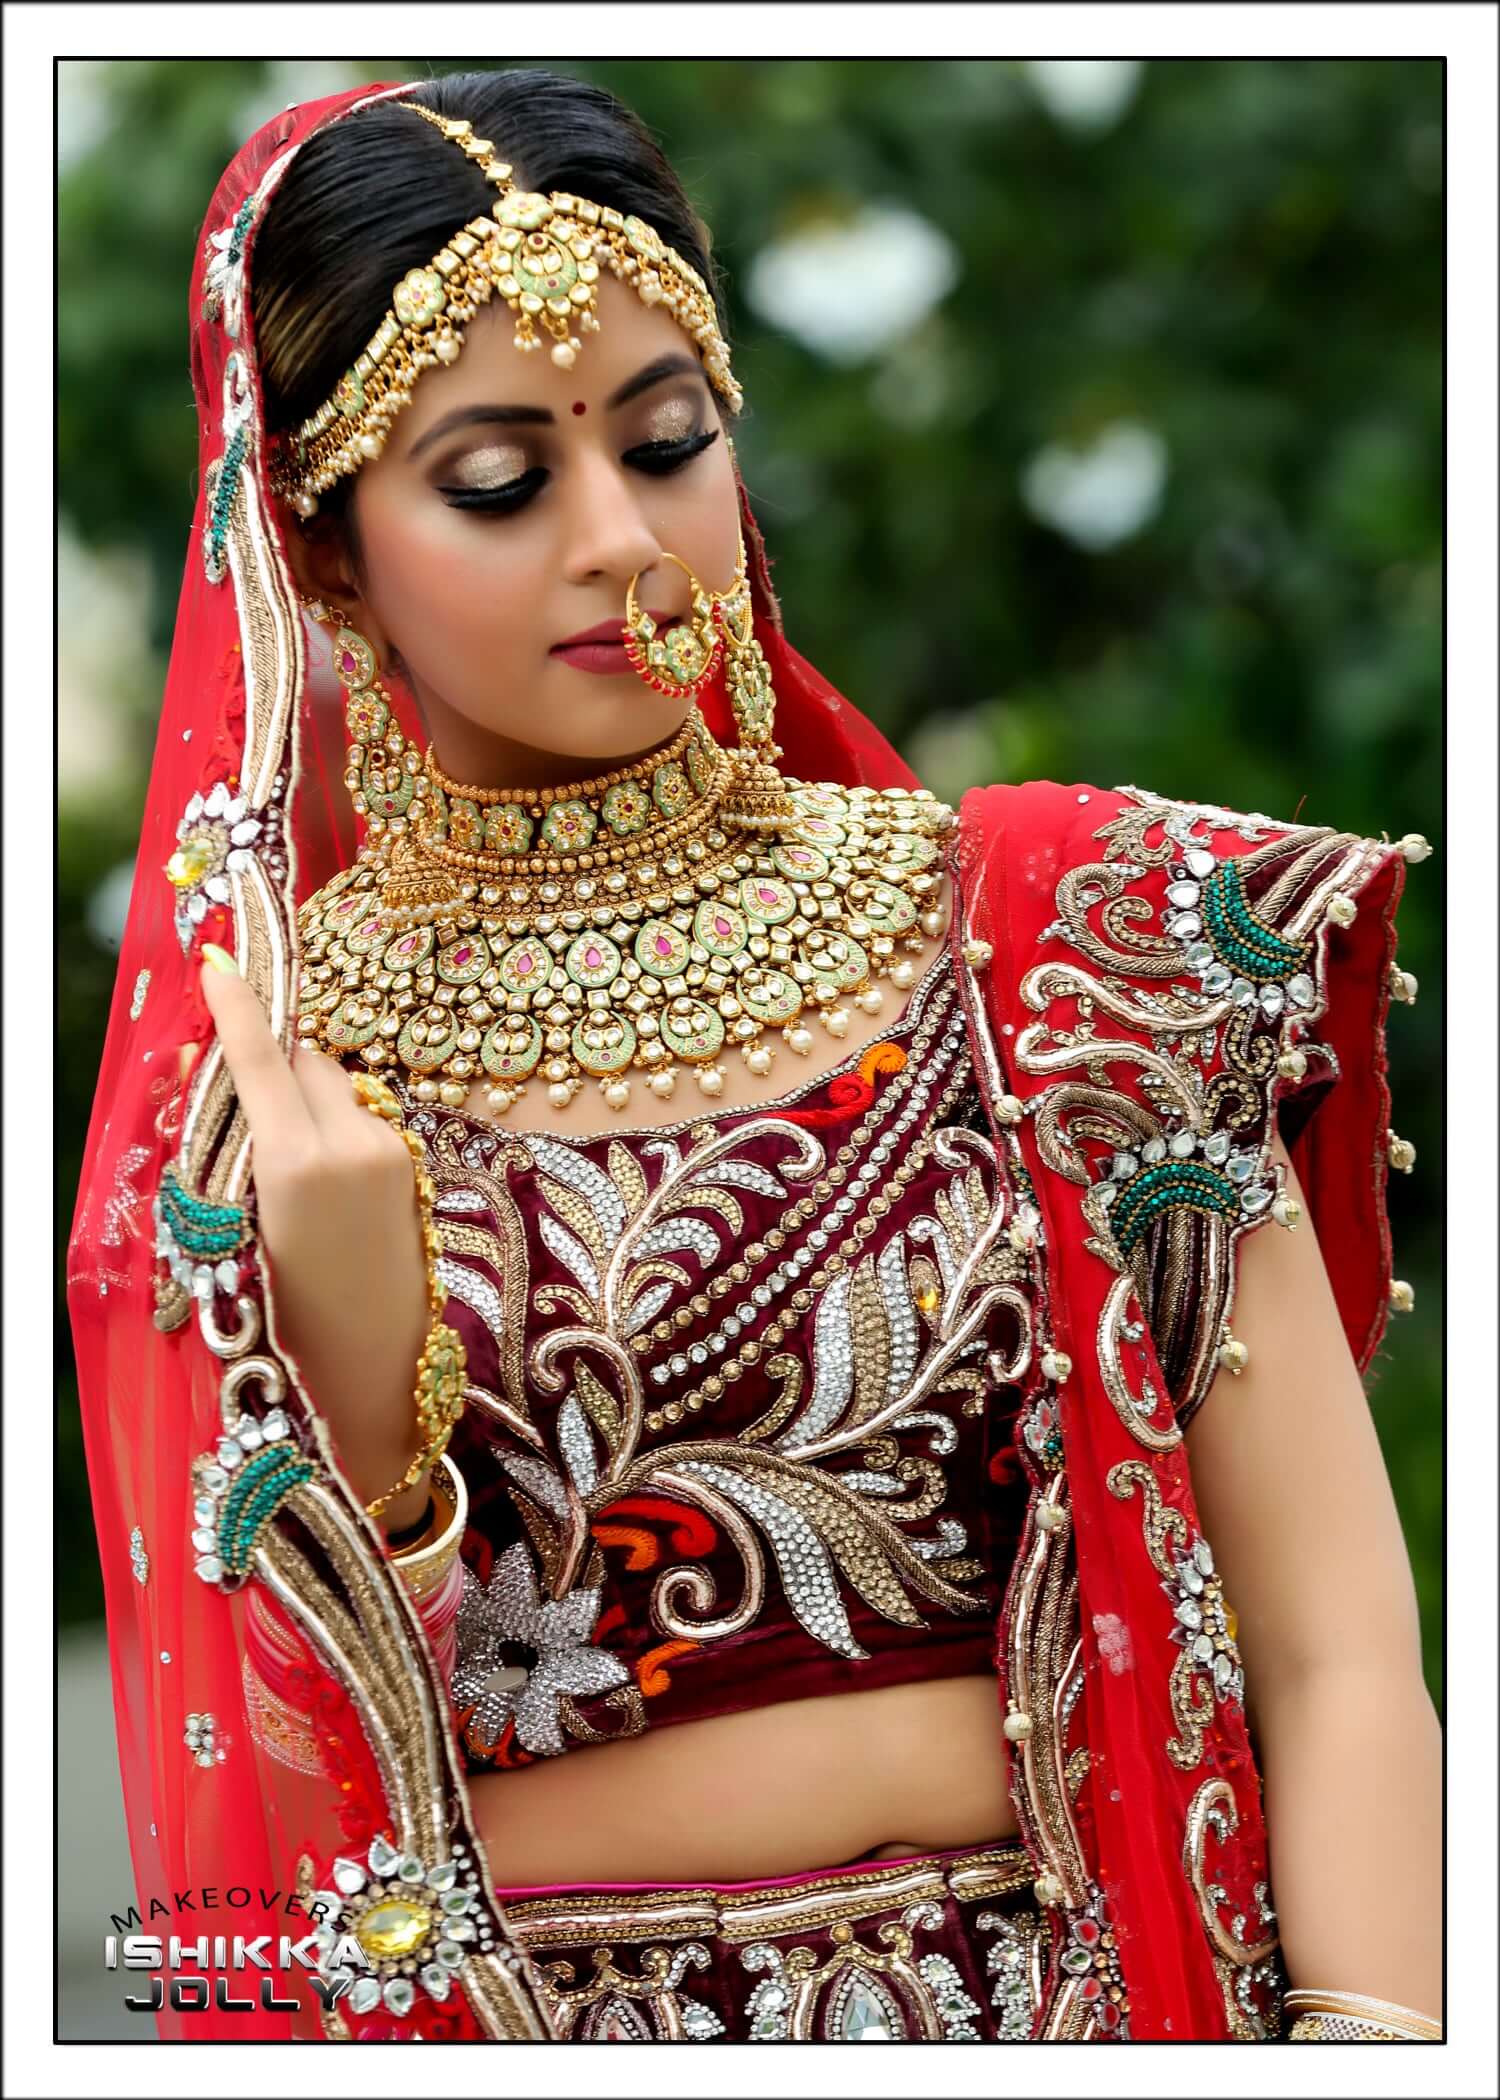 Hire a Expert Freelance Makeup Artist in Delhi for your Wedding Day